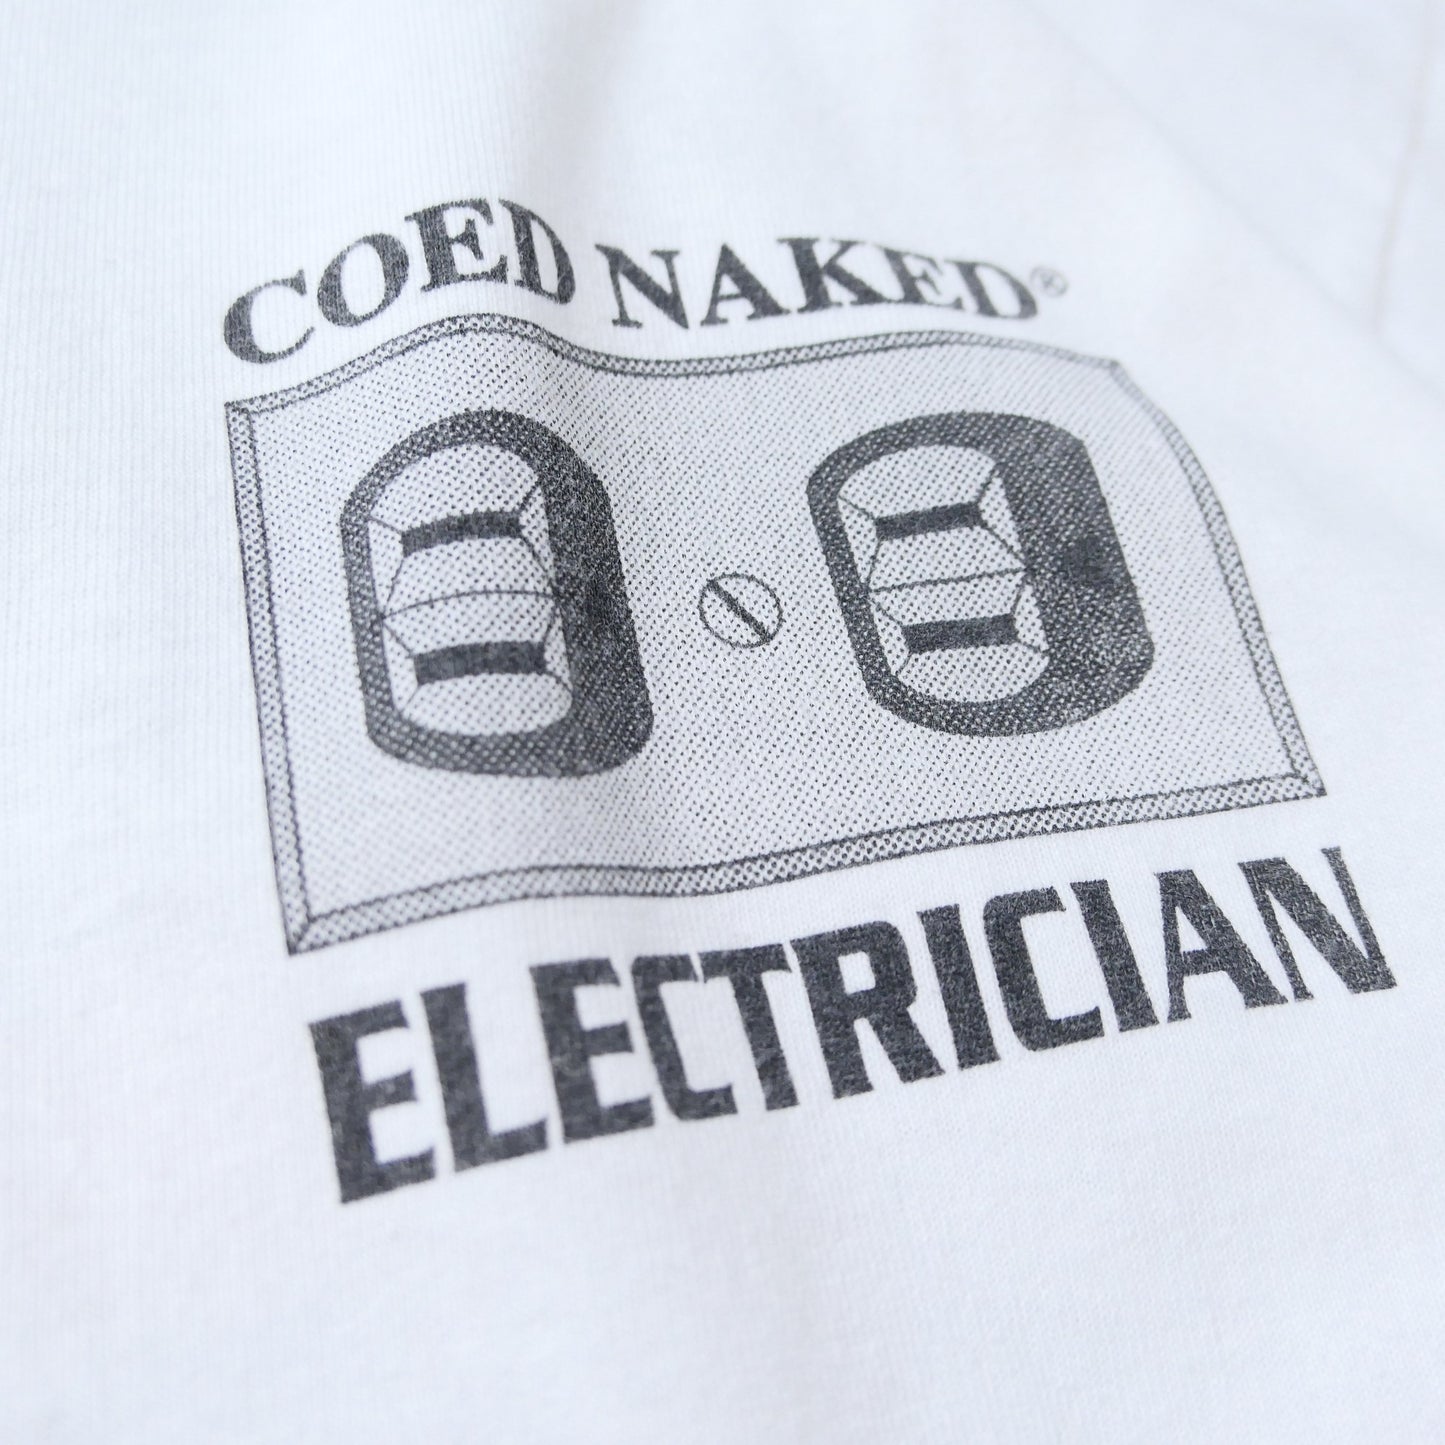 VINTAGE 90s XL Promotion Tee -COED NAKED-